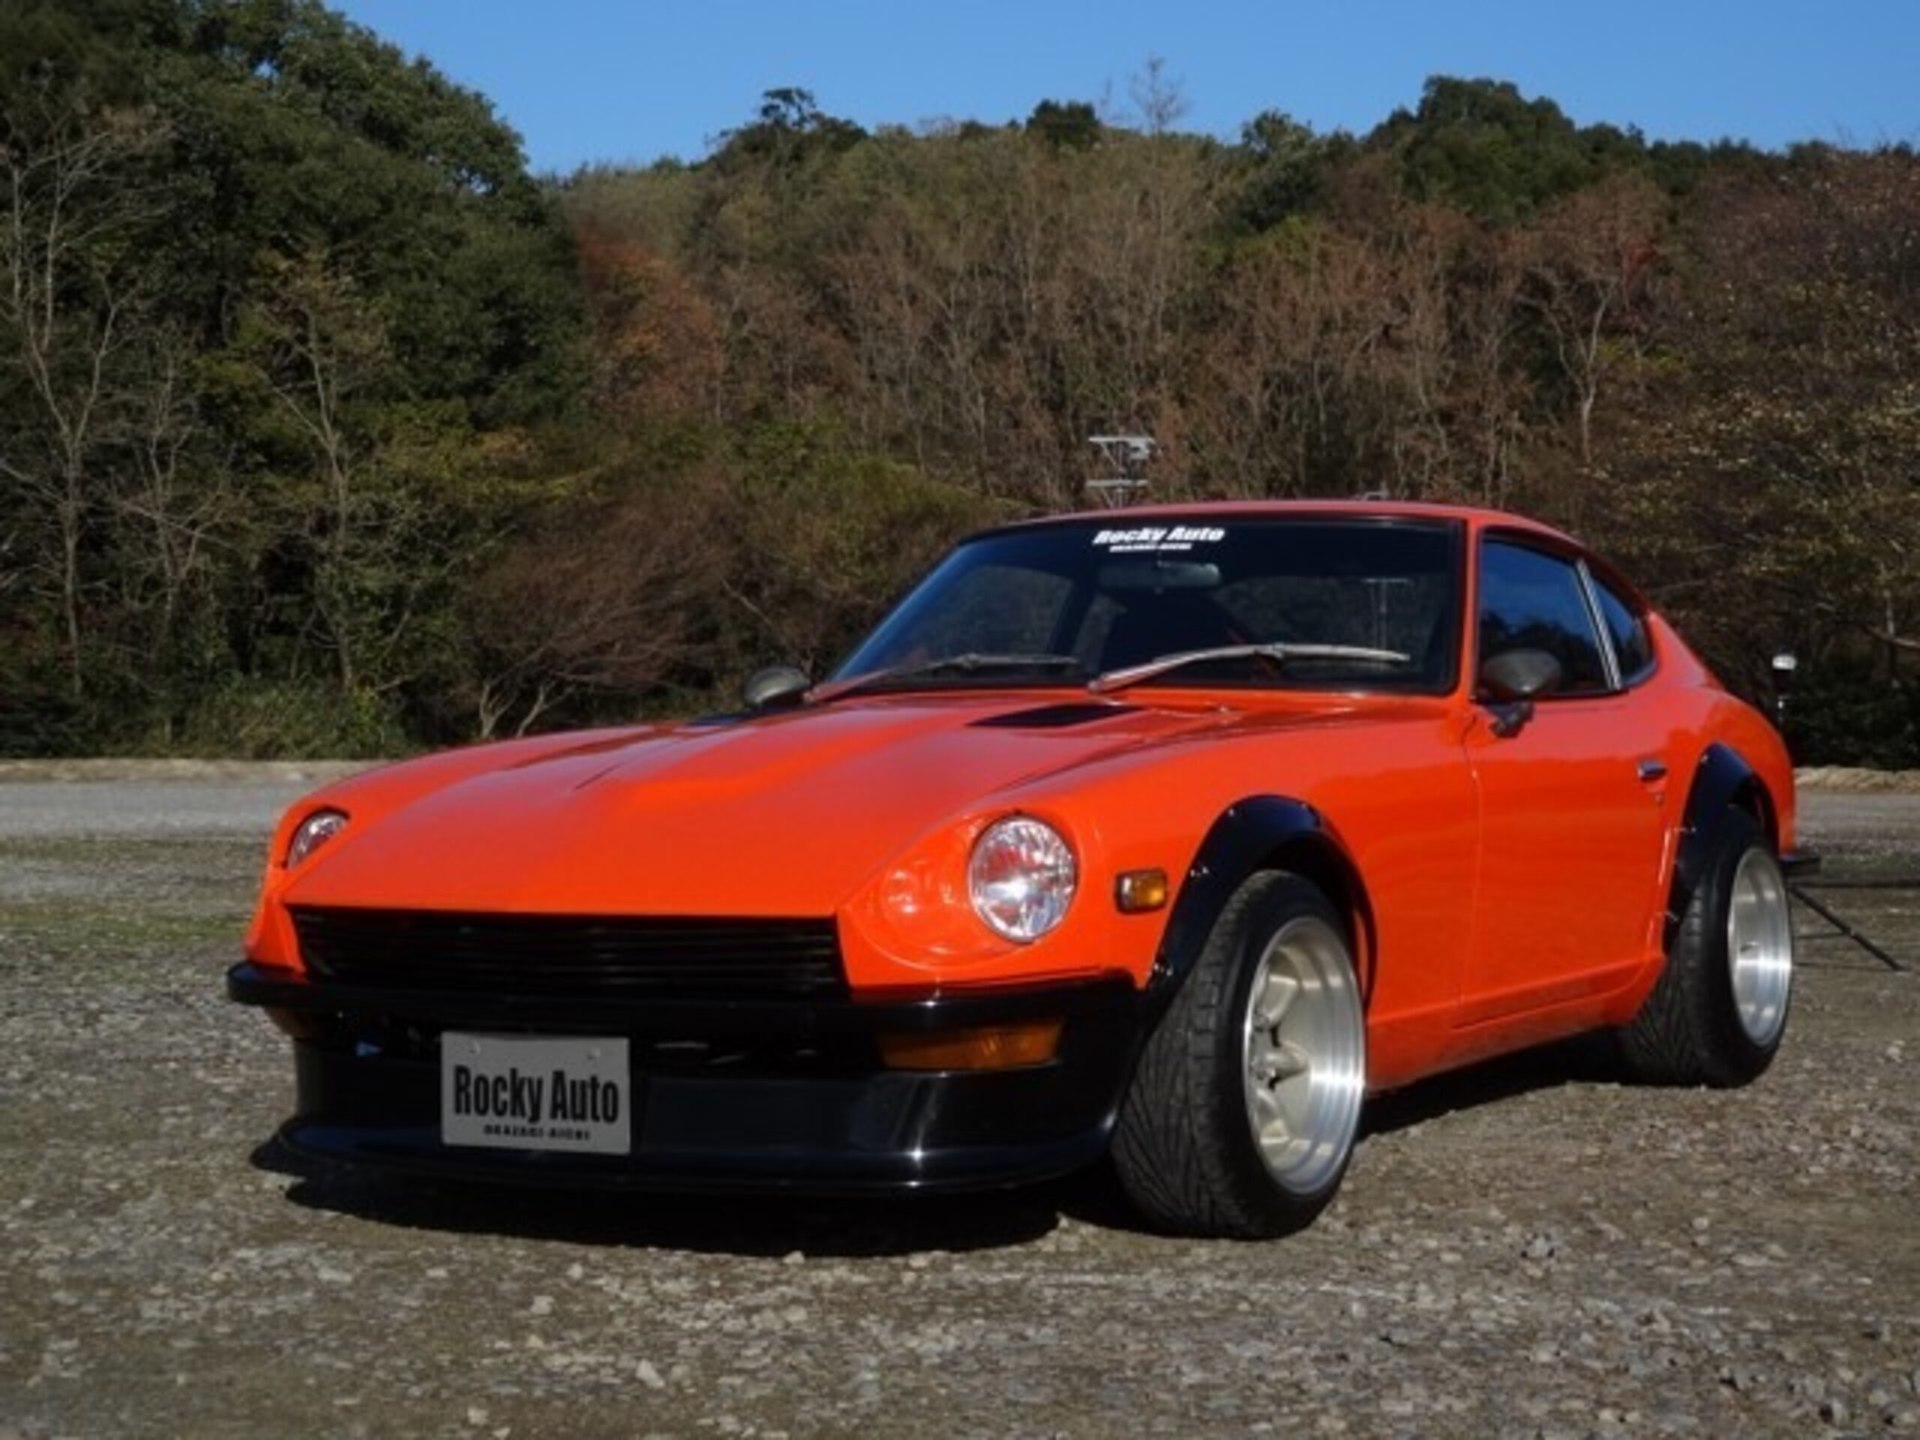 S30 Fairlady Z 5mt Swapped To Rb25 Sports Injection Engine 日産 フェアレディzs30z Rb25スポーツインジェクション オレンジ 車両本体価格 1078 0万円 日産車中古車紹介 Jdm Nissan Used Car